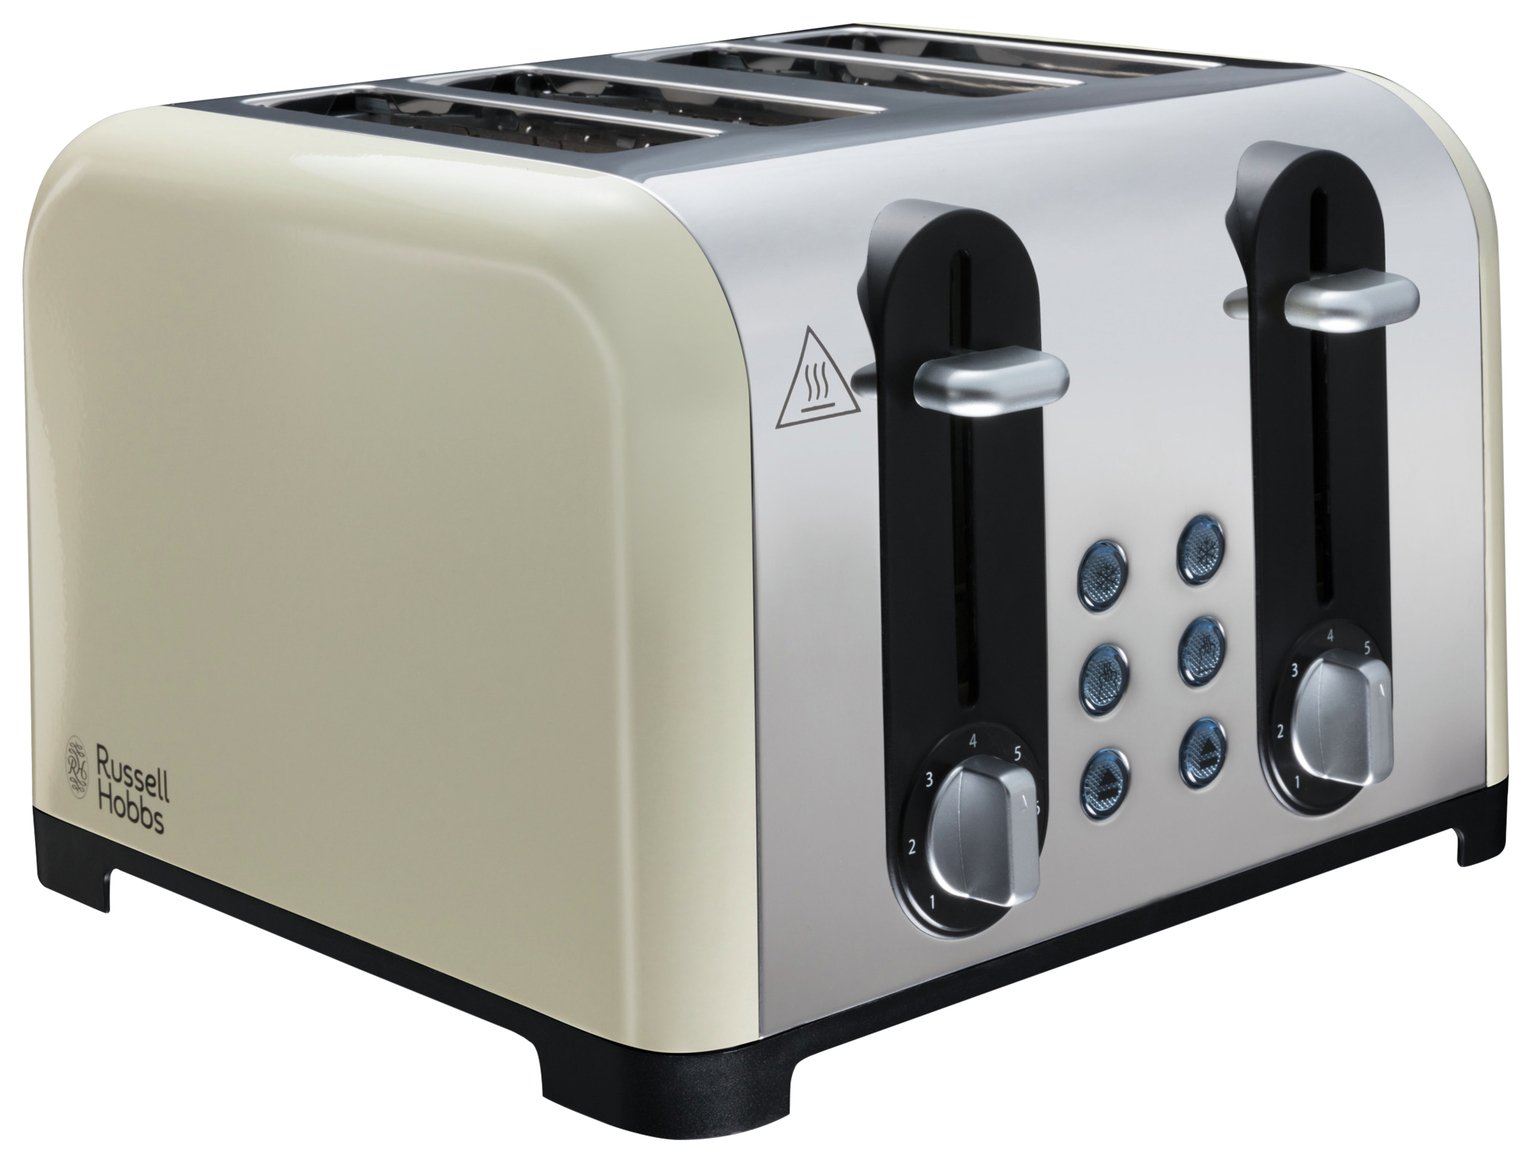 Russell Hobbs 22408 Worcester 4 Slice Toaster Review